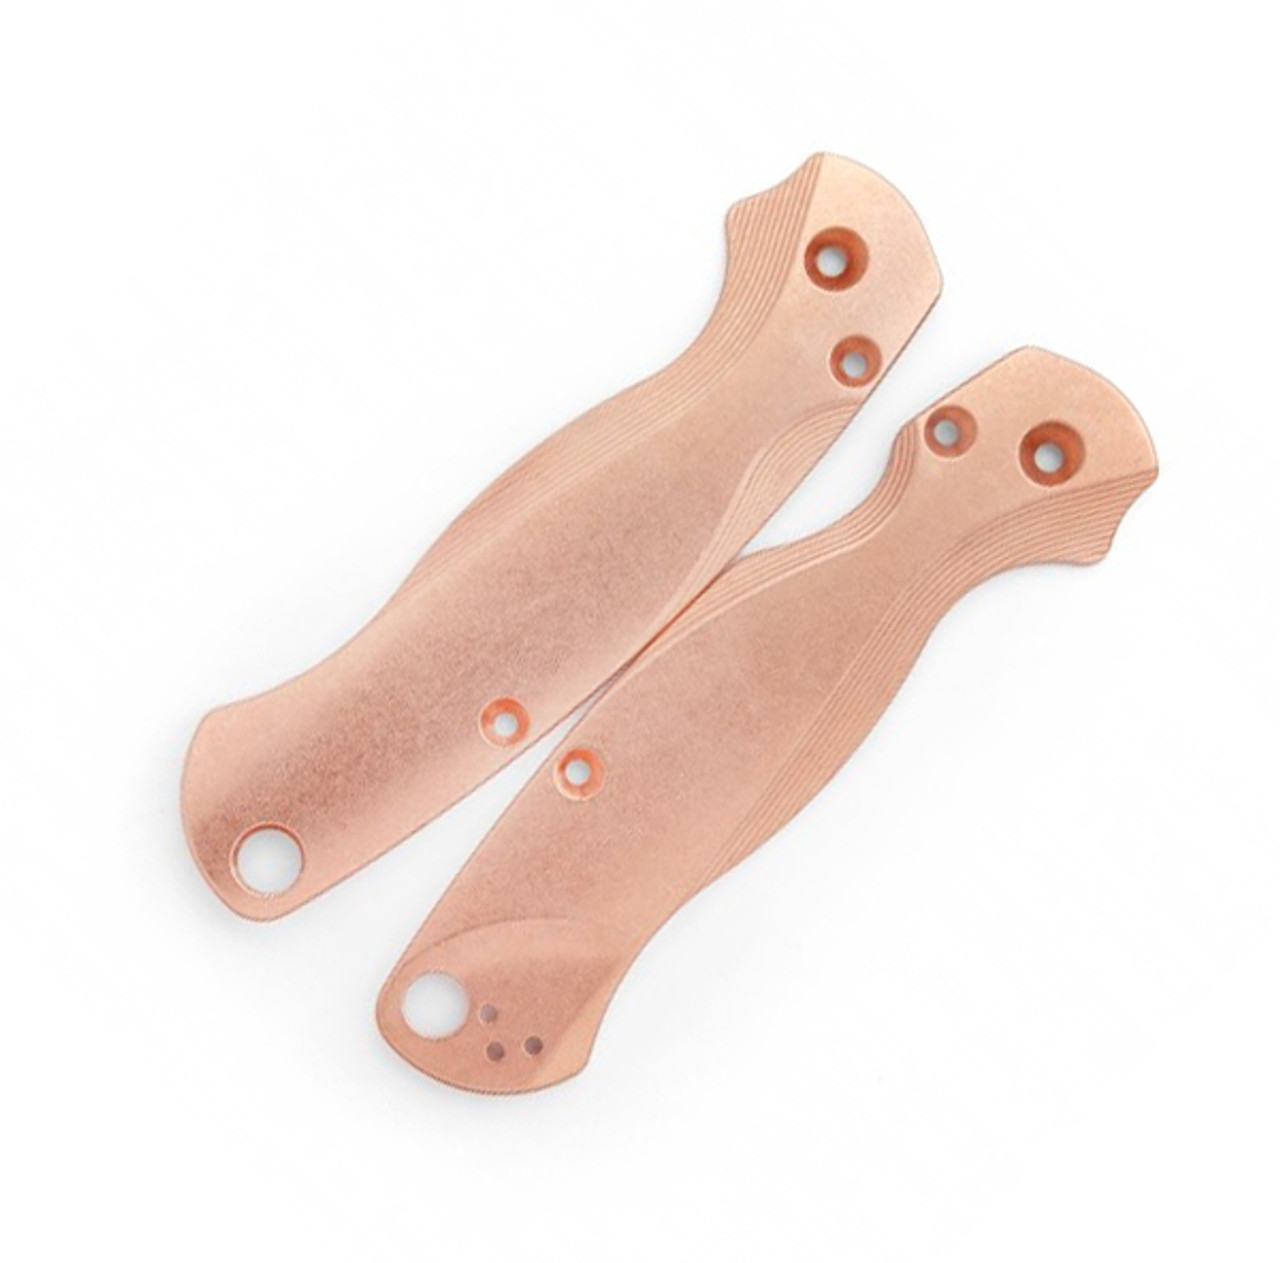 Flytanium Lotus Copper Stonewashed Scales - for Spyderco Paramilitary 2 Knife